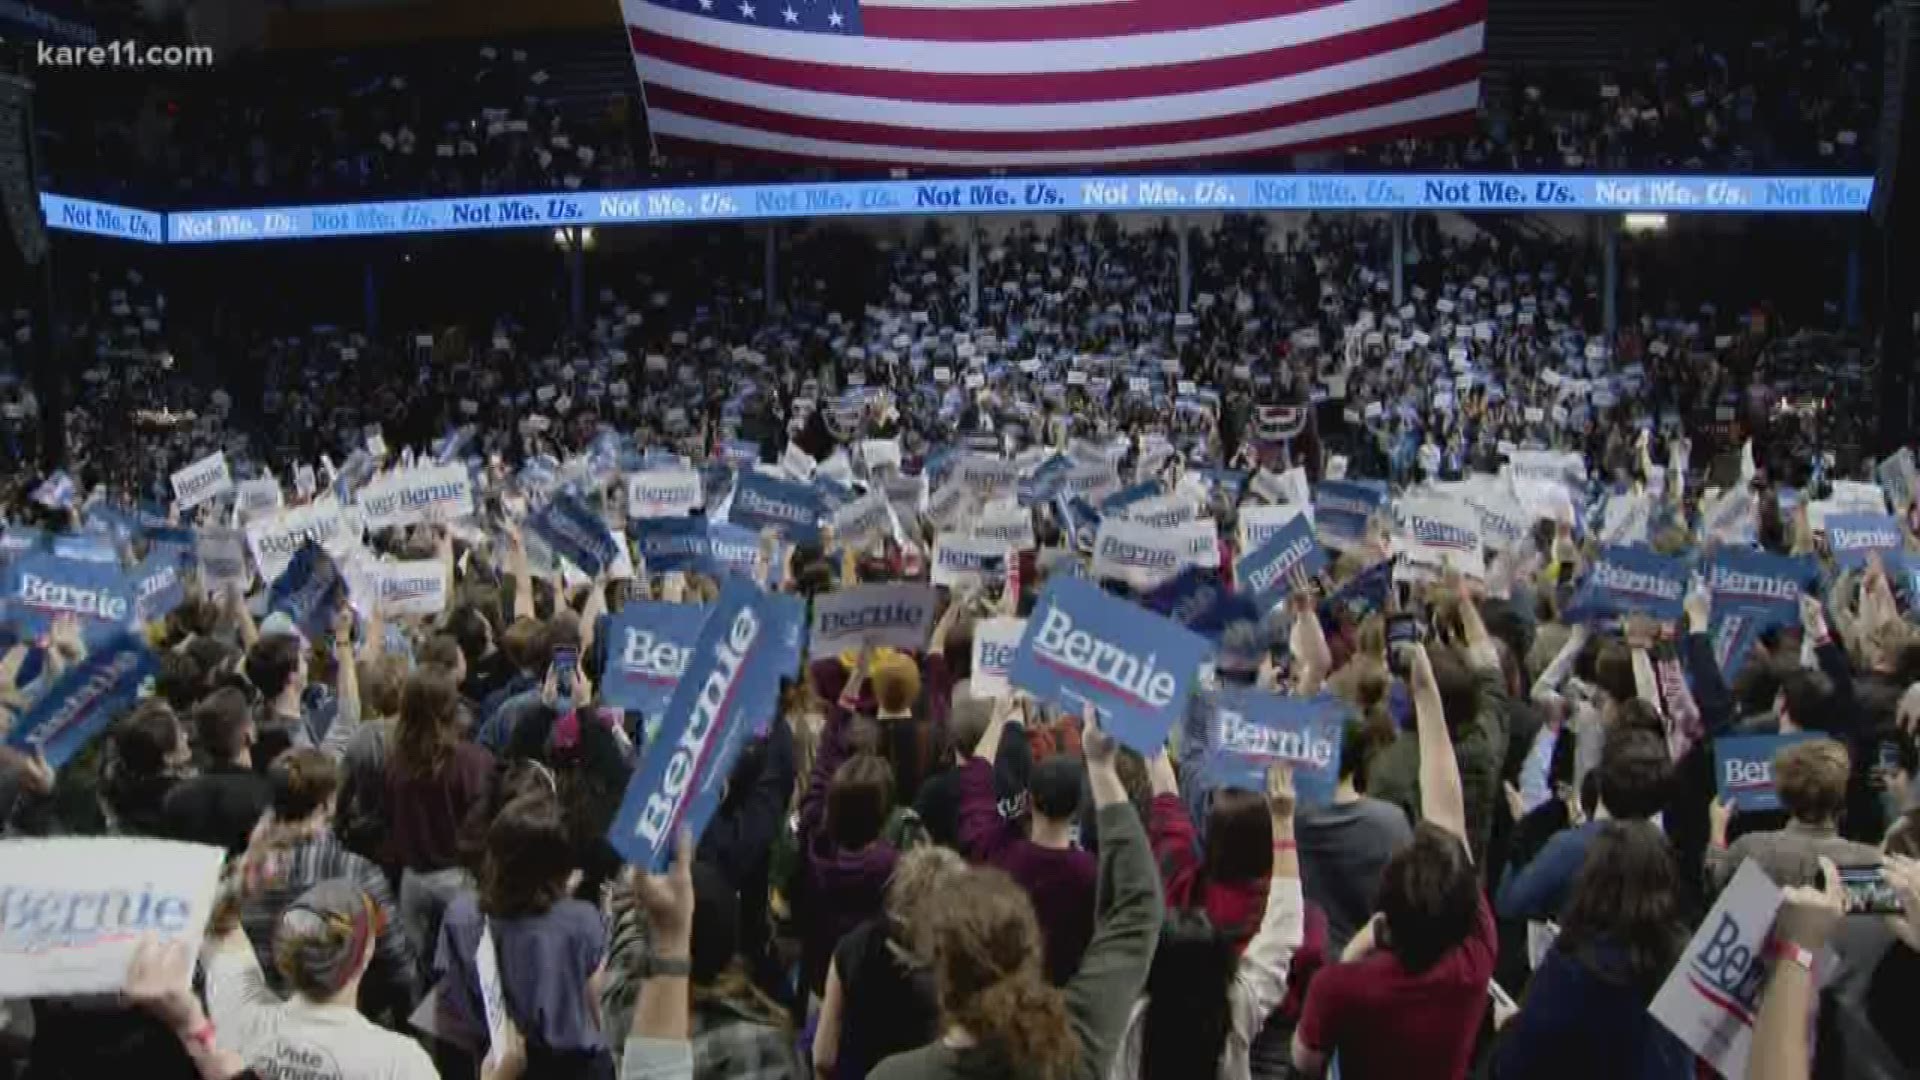 Sen. Bernie Sanders held a presidential campaign rally at the University of Minnesota's Williams arena Sunday night.